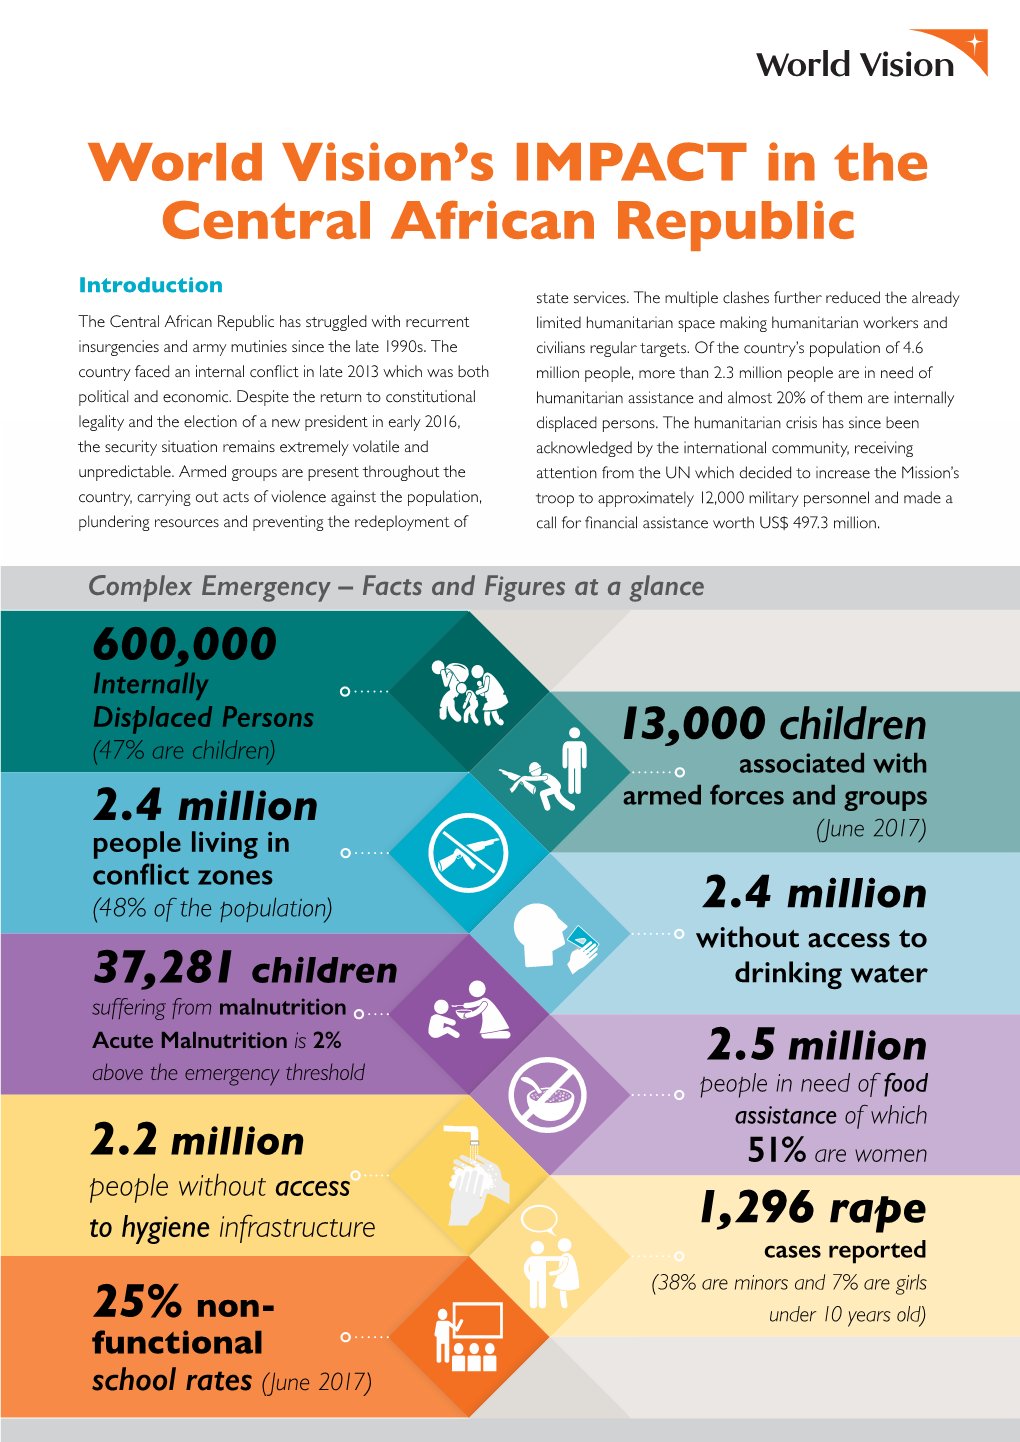 World Vision's IMPACT in the Central African Republic